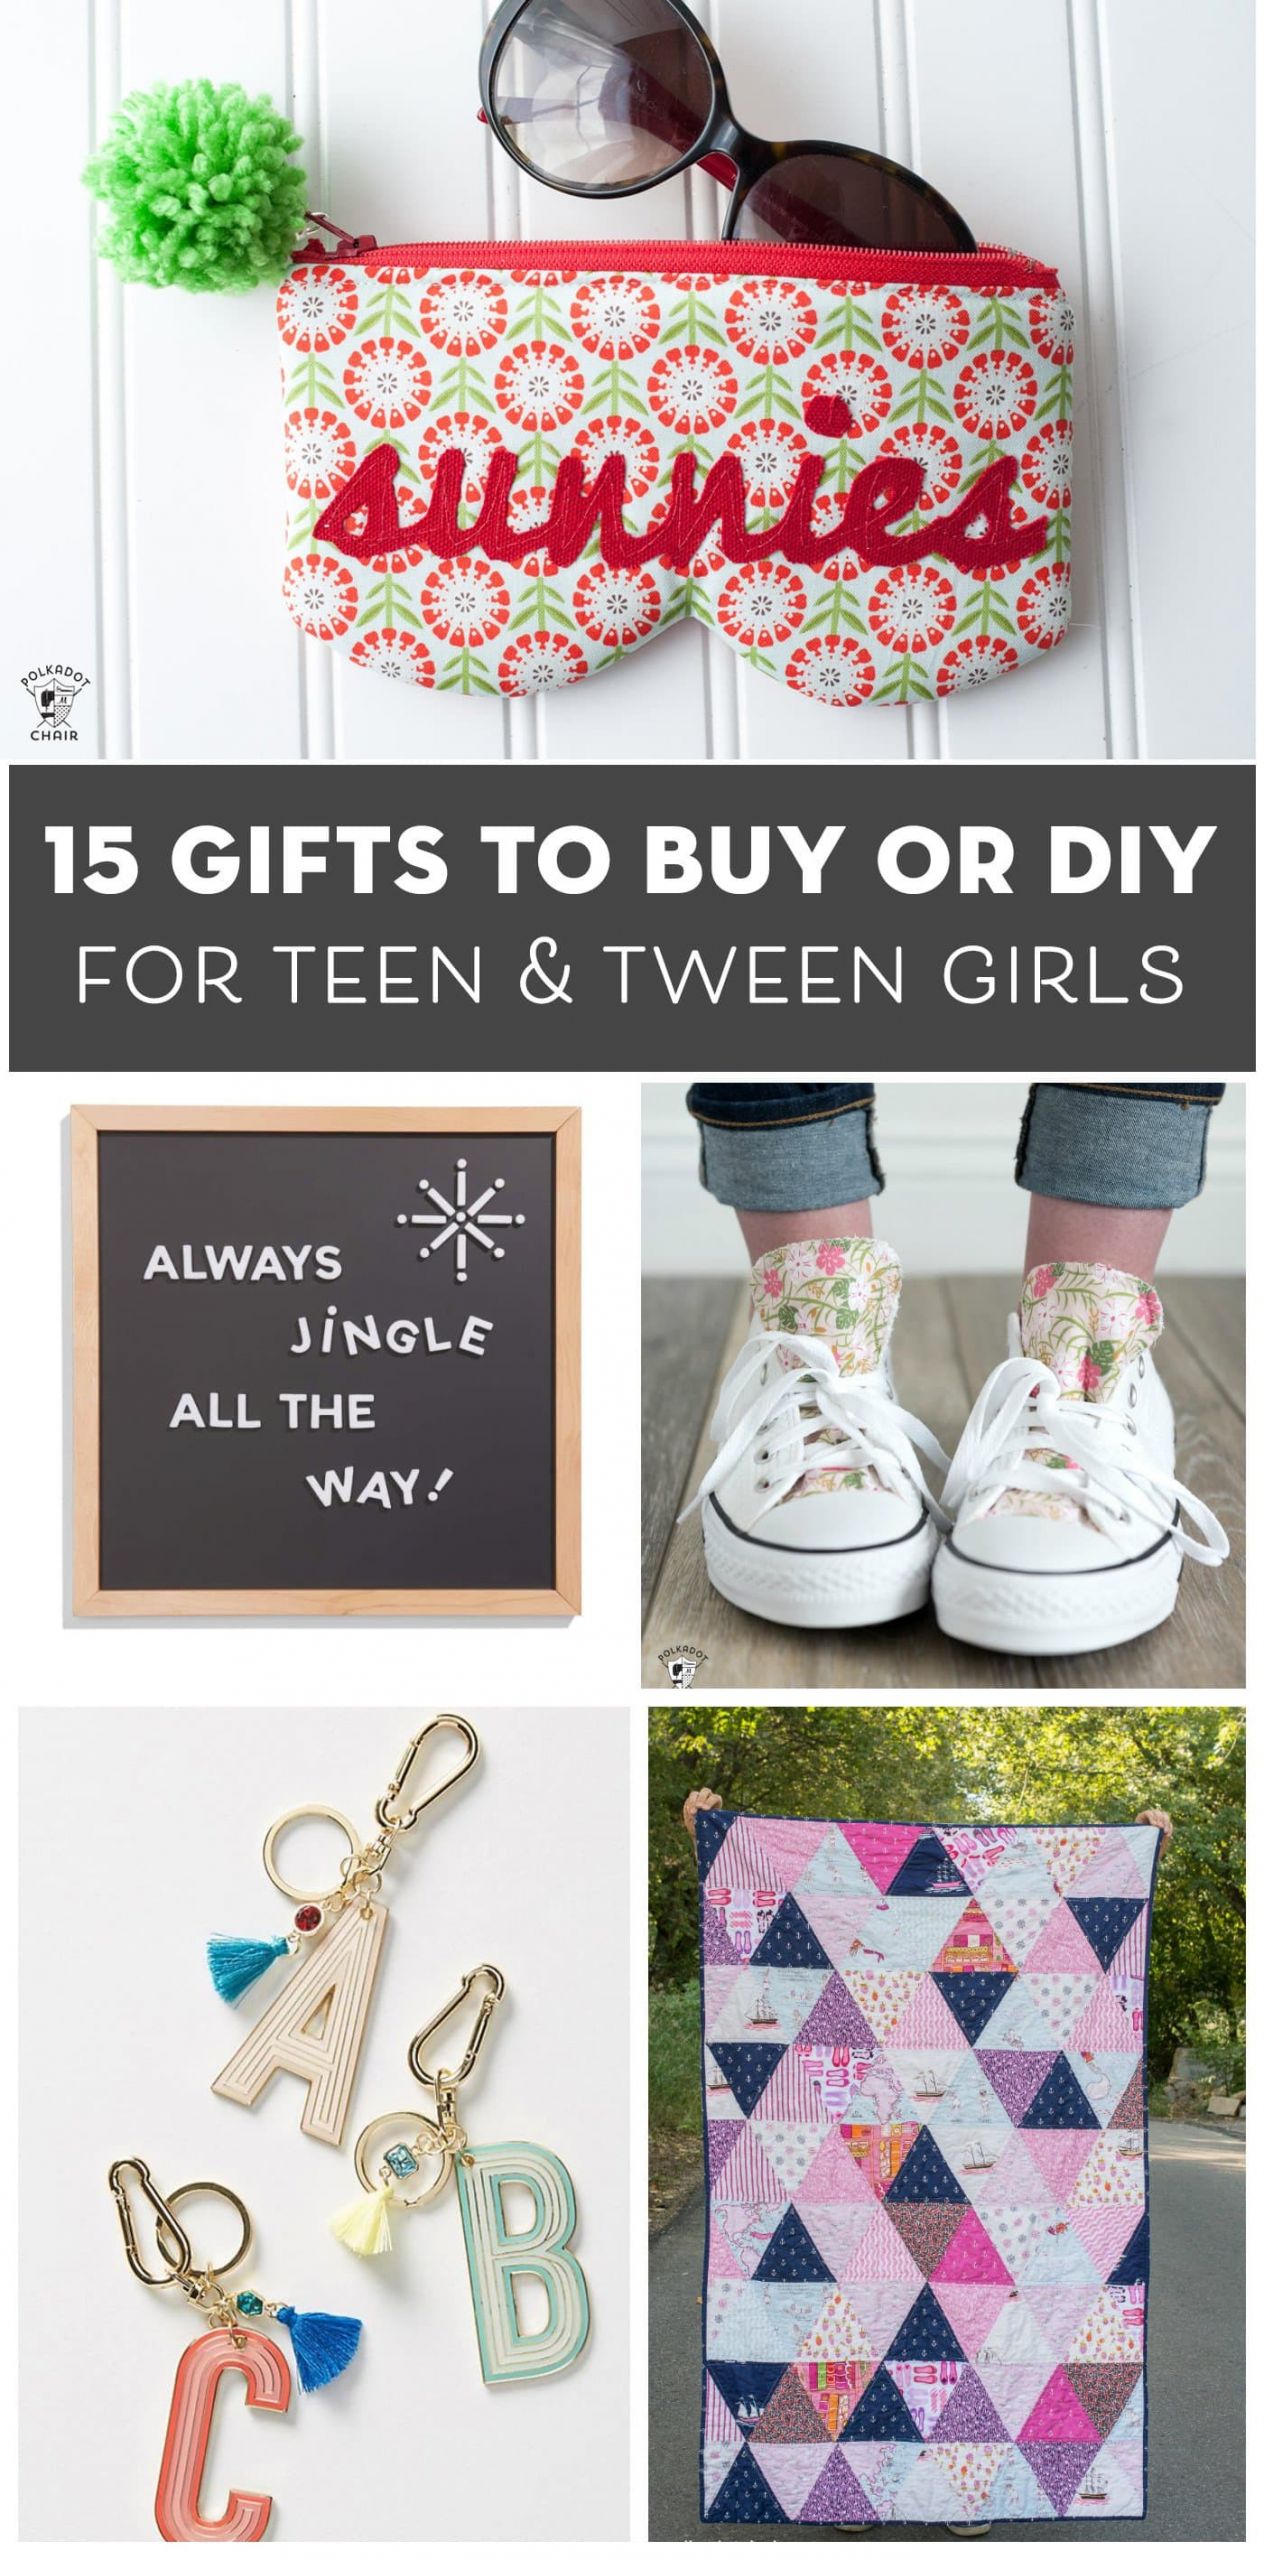 Gift For Girls Ideas
 15 Gift Ideas for Teenage Girls That You Can DIY or Buy